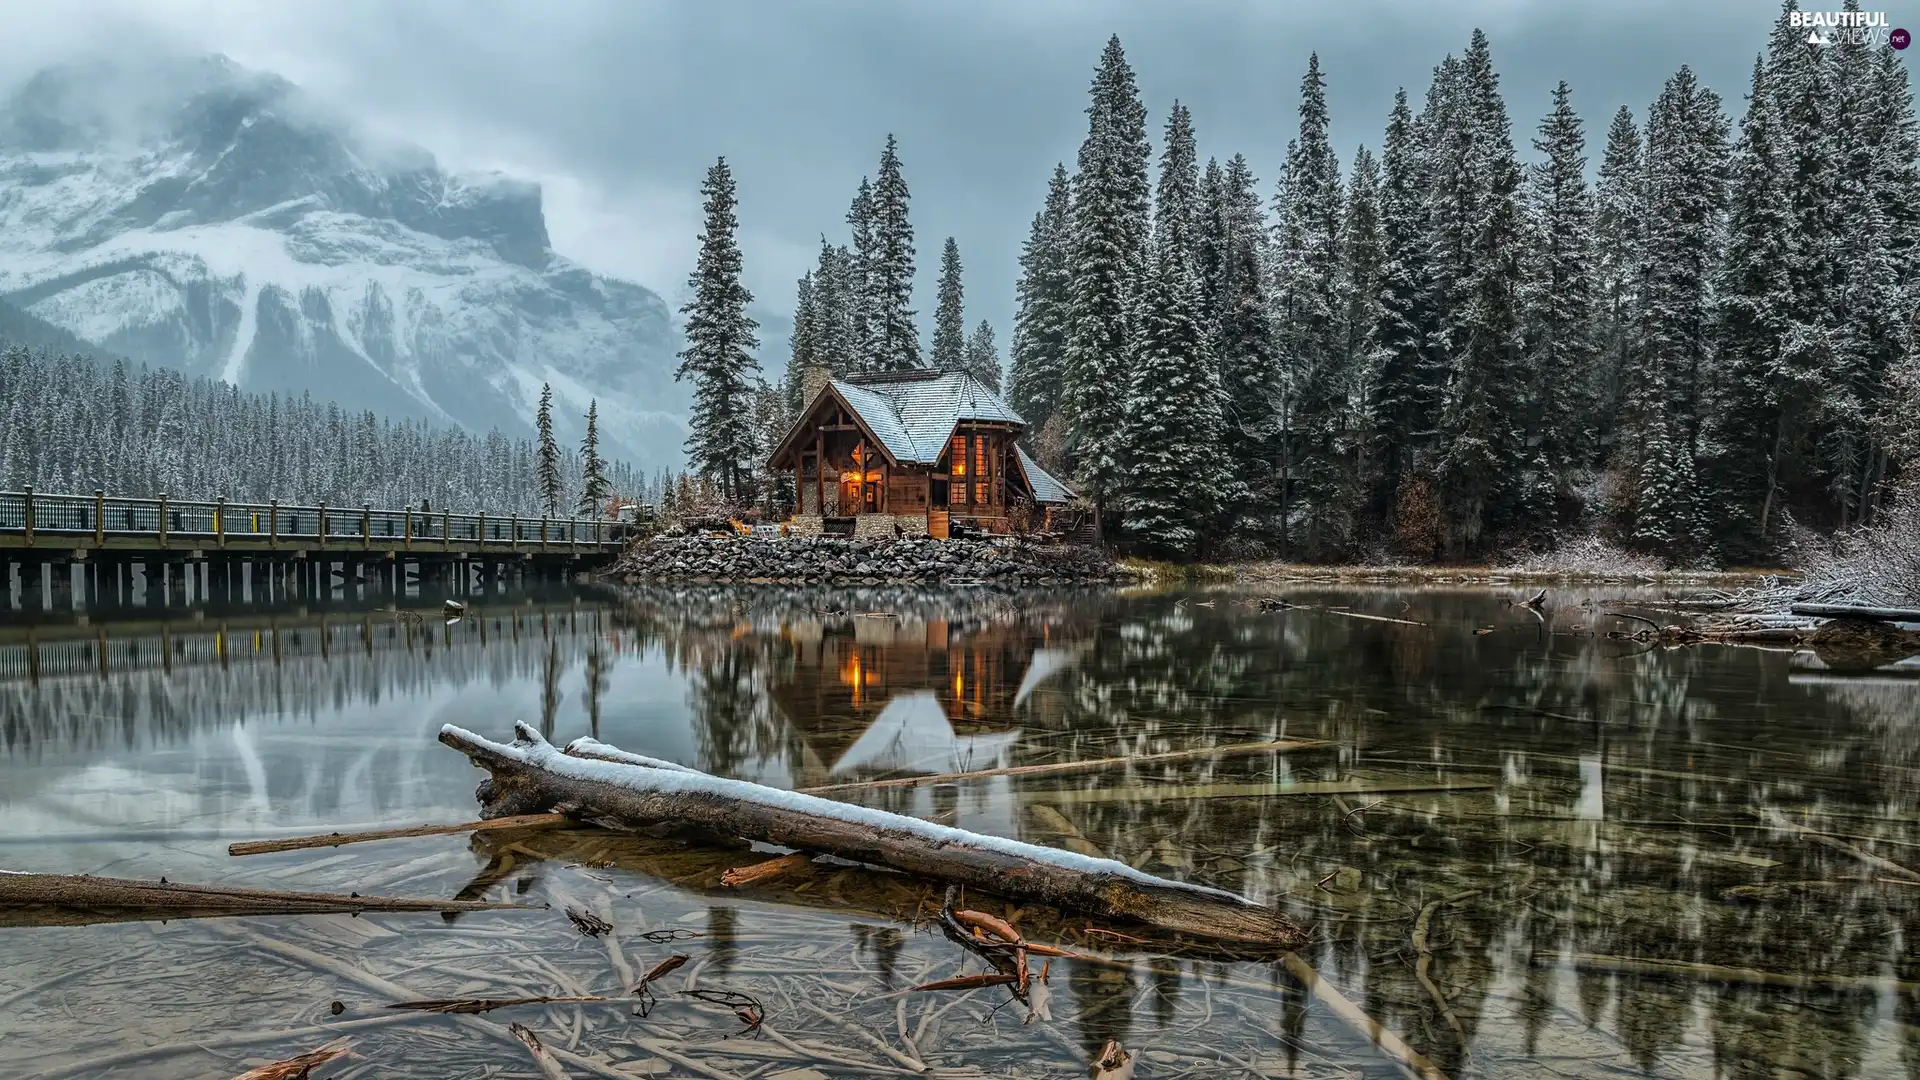 viewes, Yoho National Park, Mountains, bridges, house, Canada, Emerald Lake, clouds, forest, trees